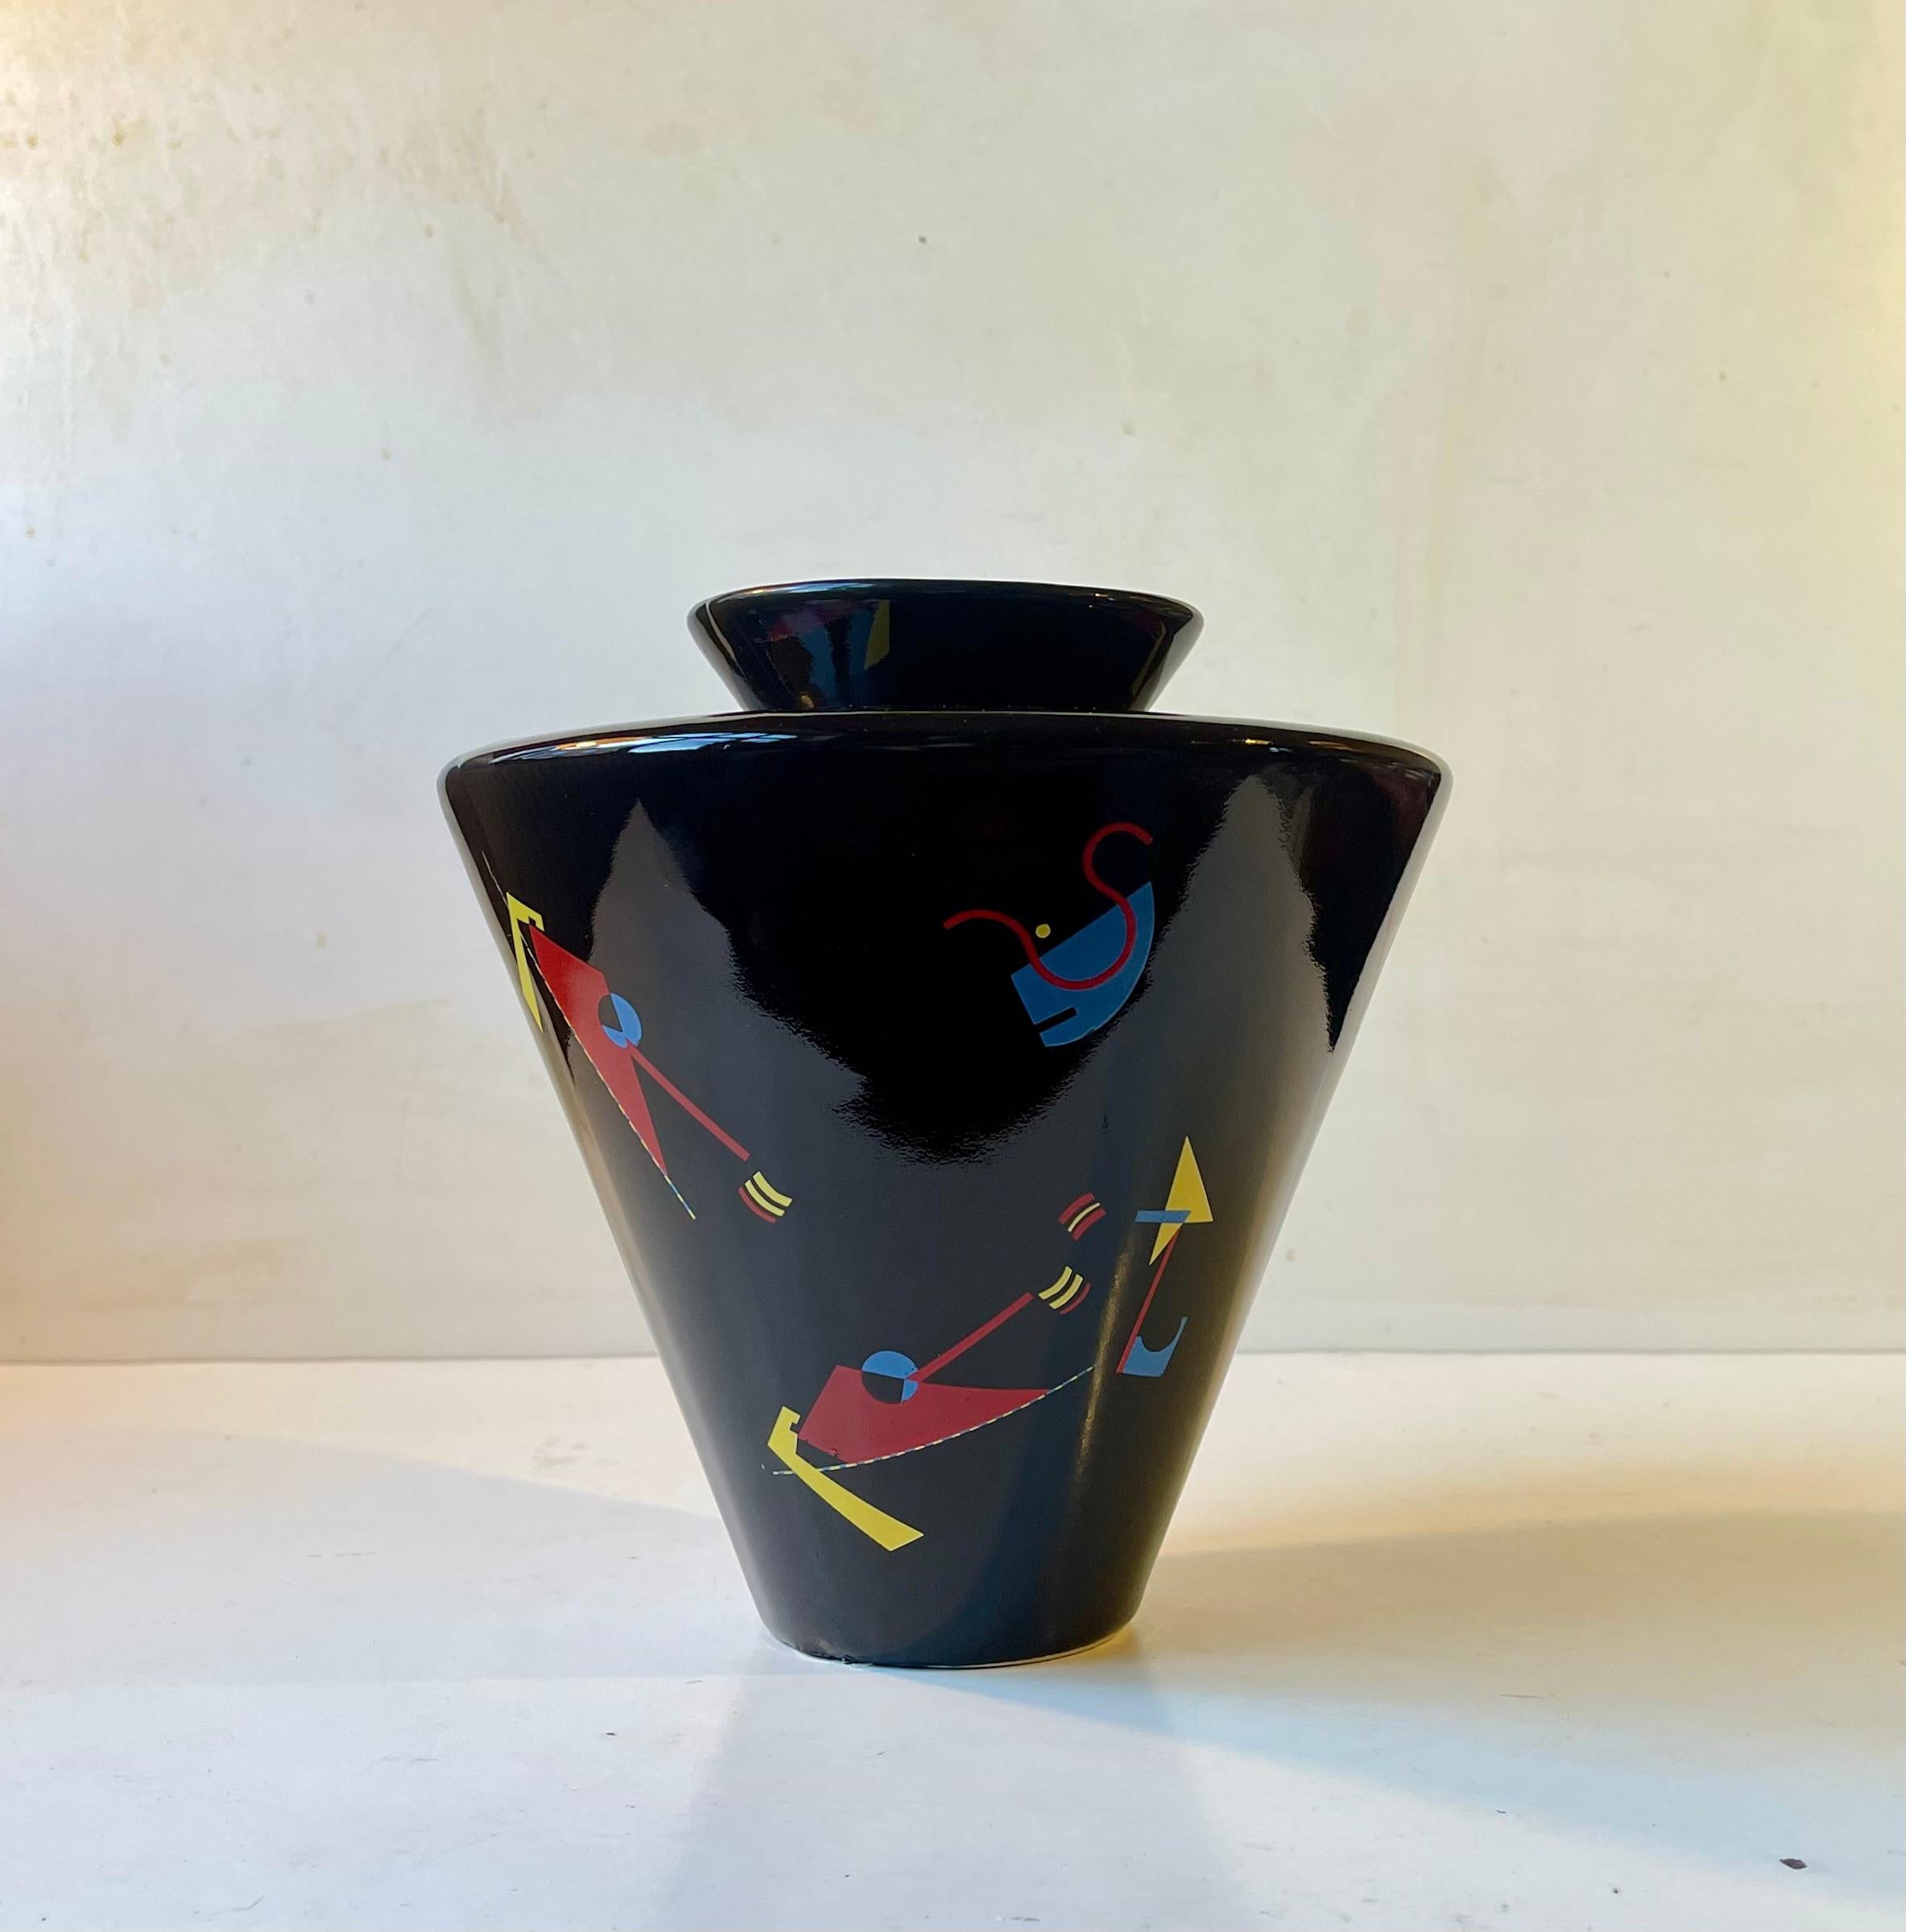 Exceptional spinner-shaped vase in glazed black porcelain. It features colorful geometric expression very much so in the style of the Godfather of Abstract epressionism Wassily Kardinski. The color palette however is more derivative of Joan Miro.